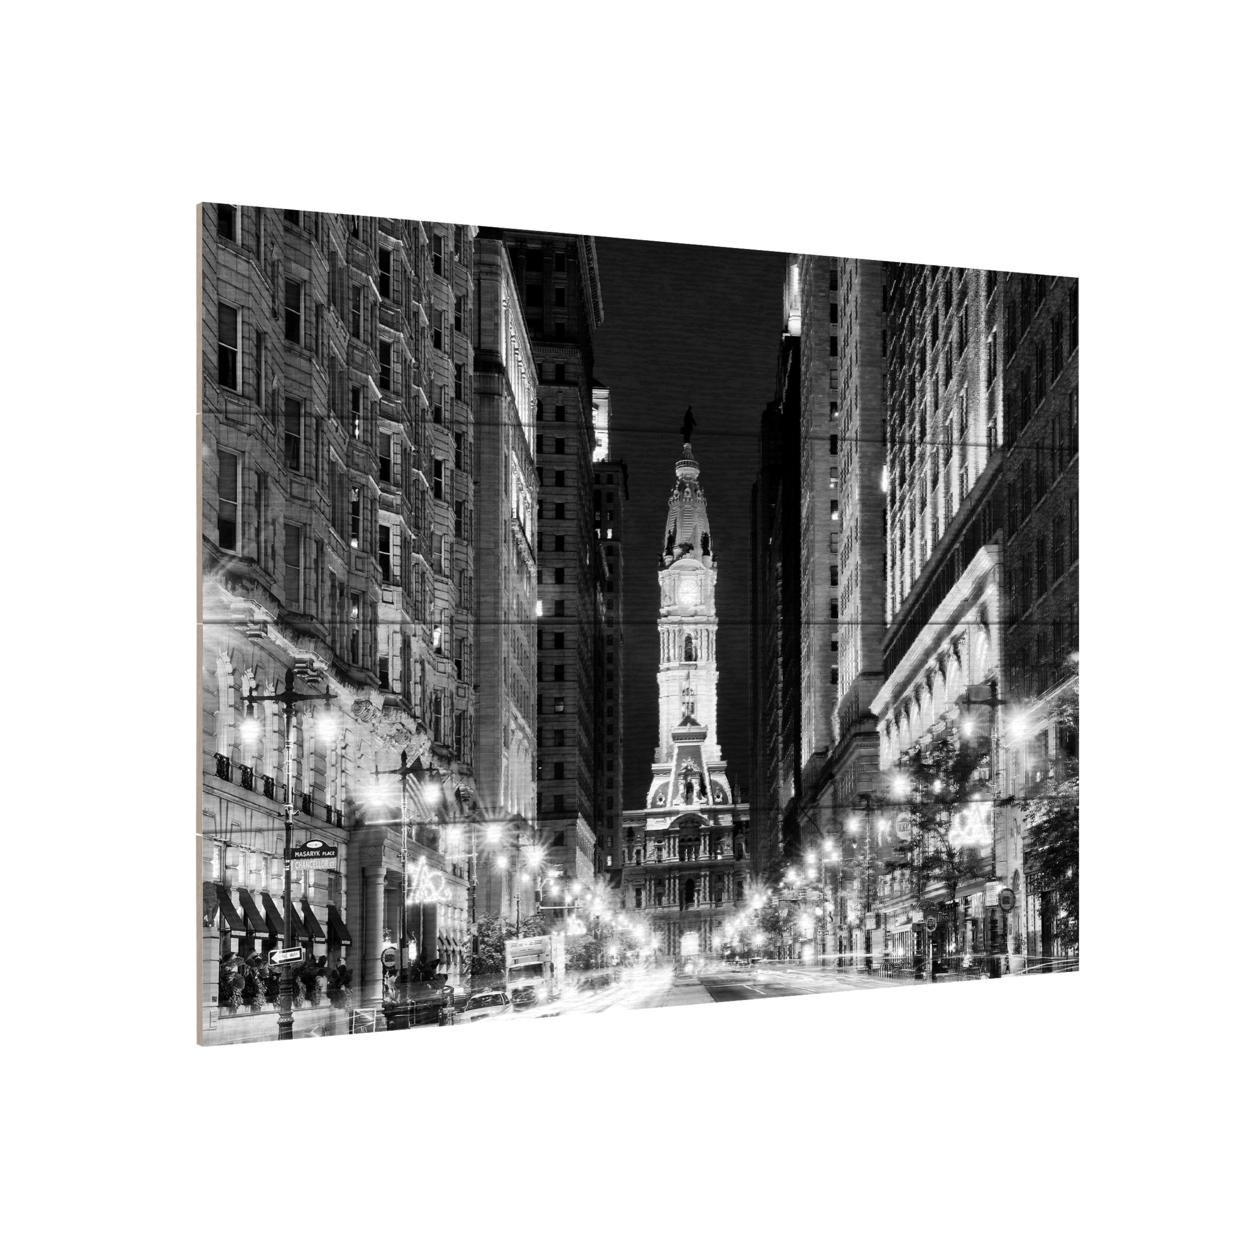 Wall Art 12 X 16 Inches Titled City Hall Philadelphia Buildings Ready To Hang Printed On Wooden Planks